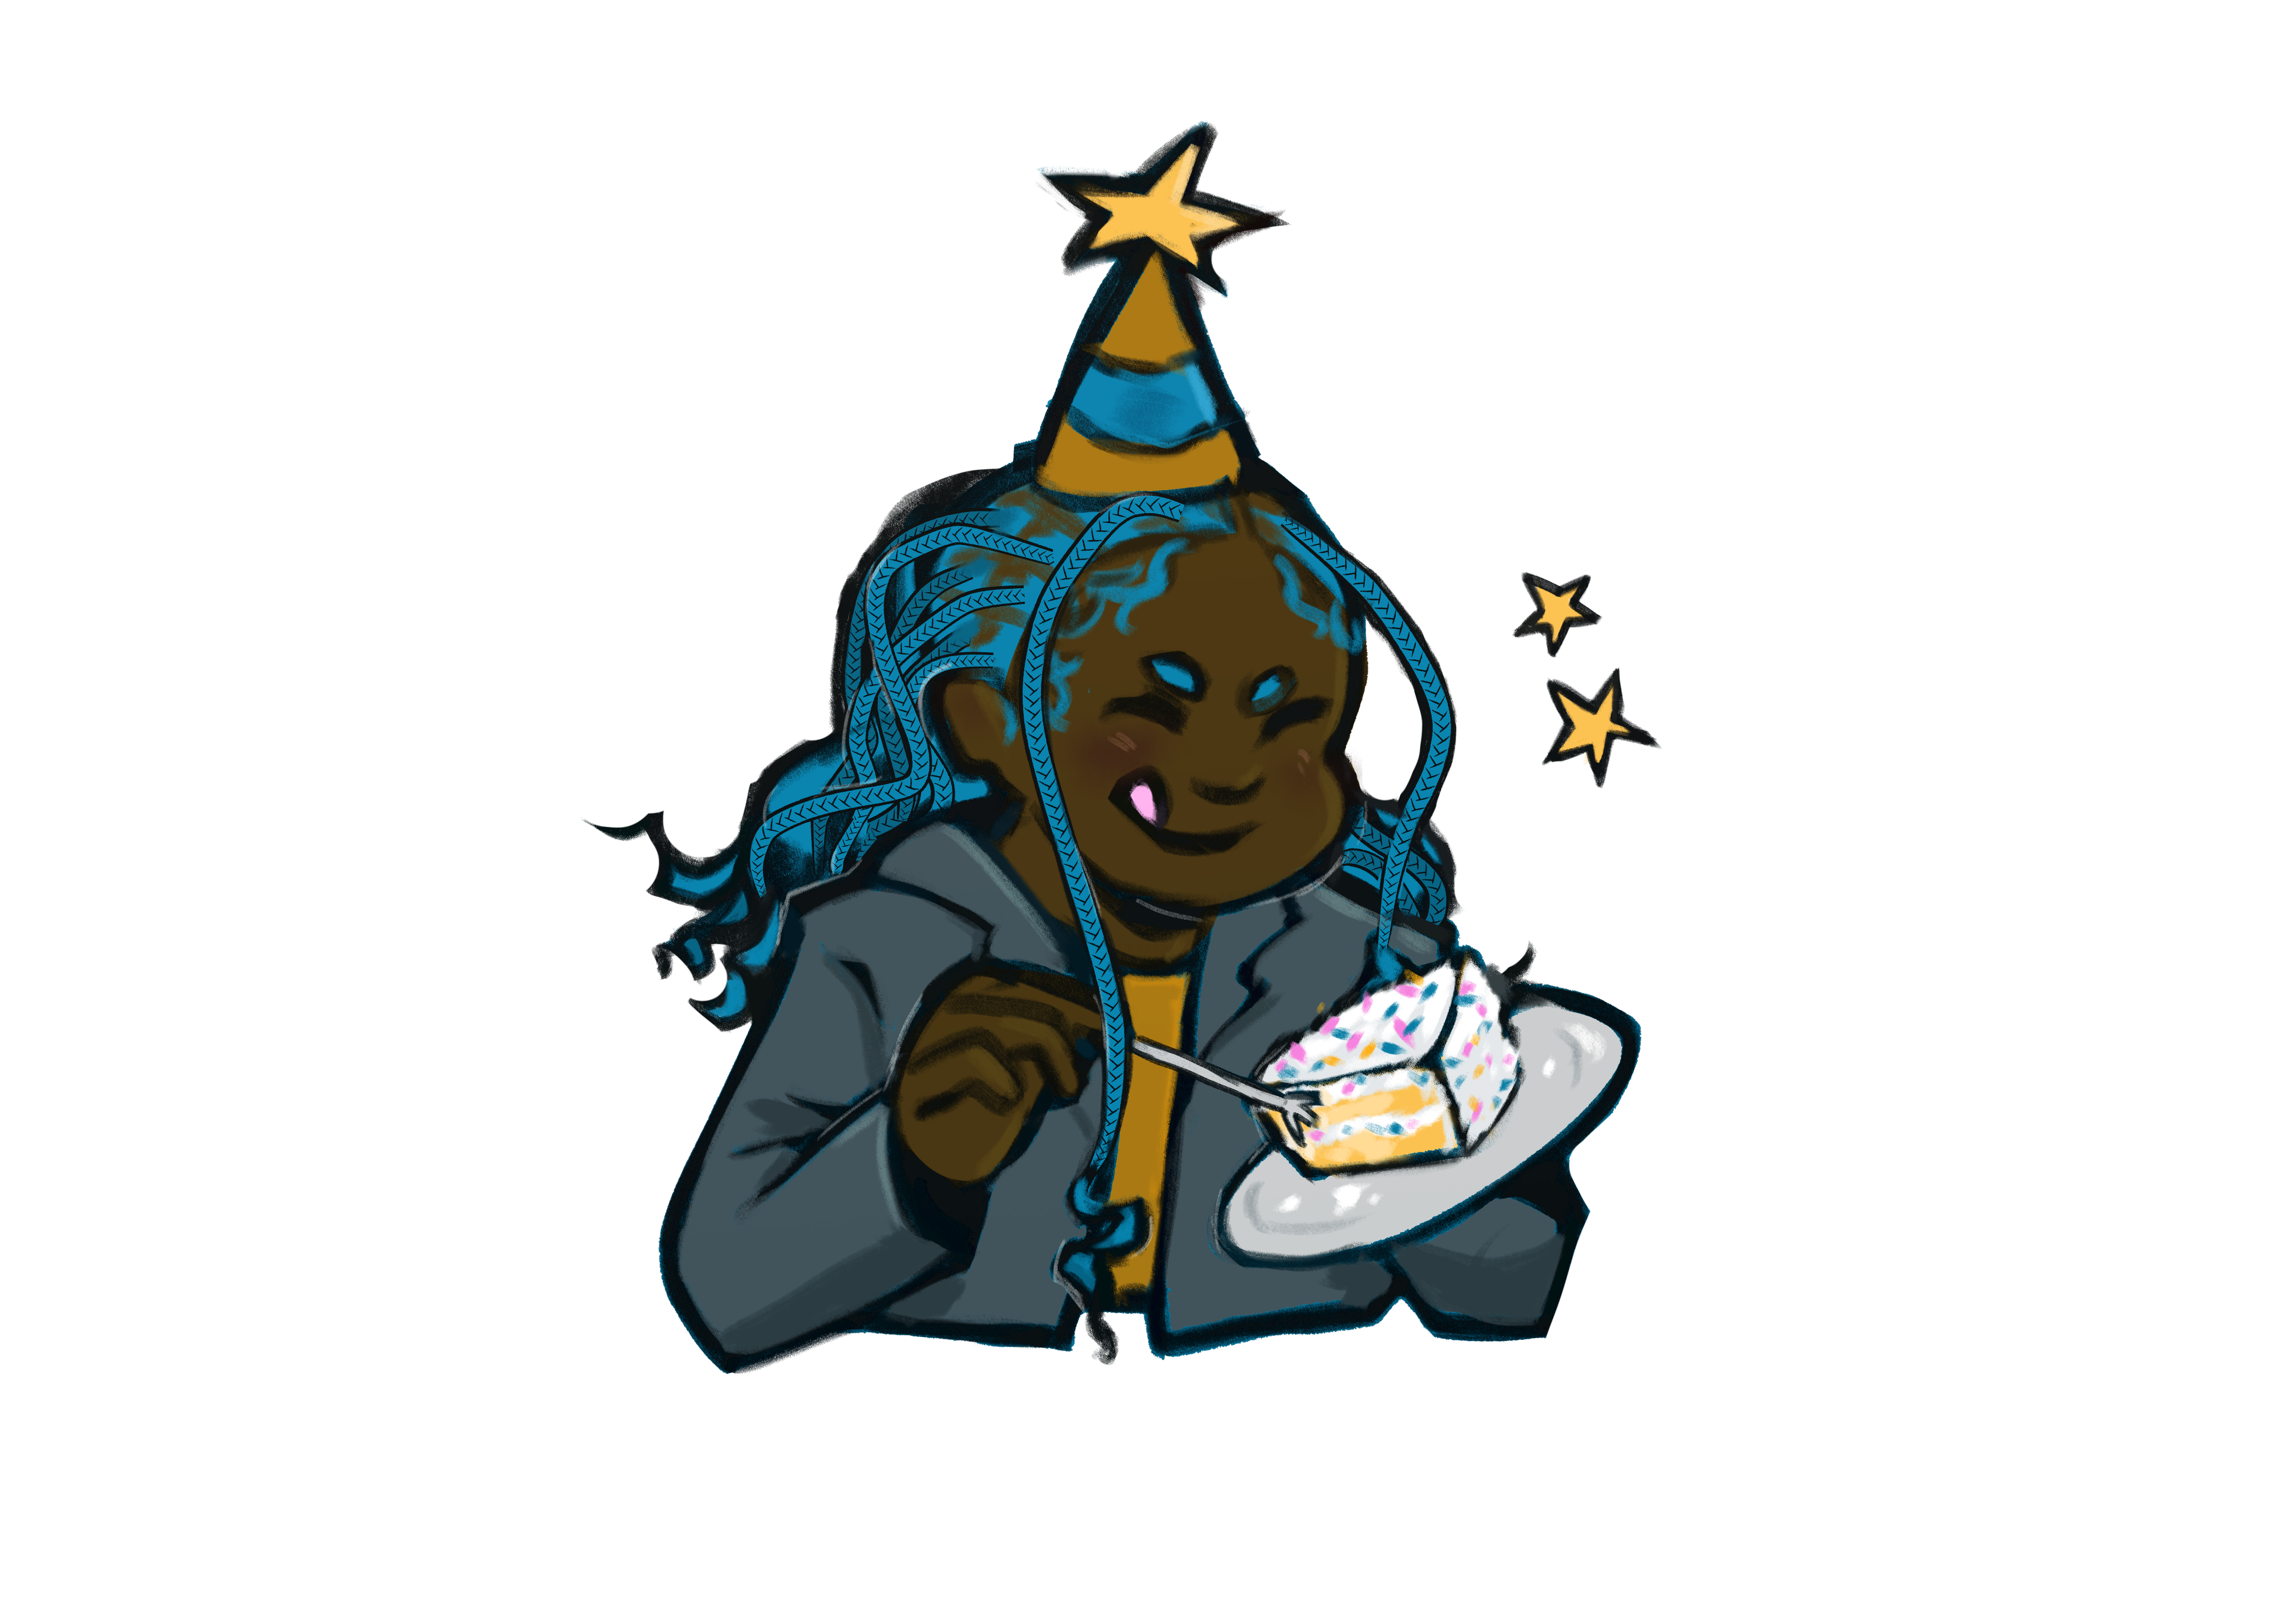 Doodle of a Black person with blue hair eating vanilla cake with sprinkles.